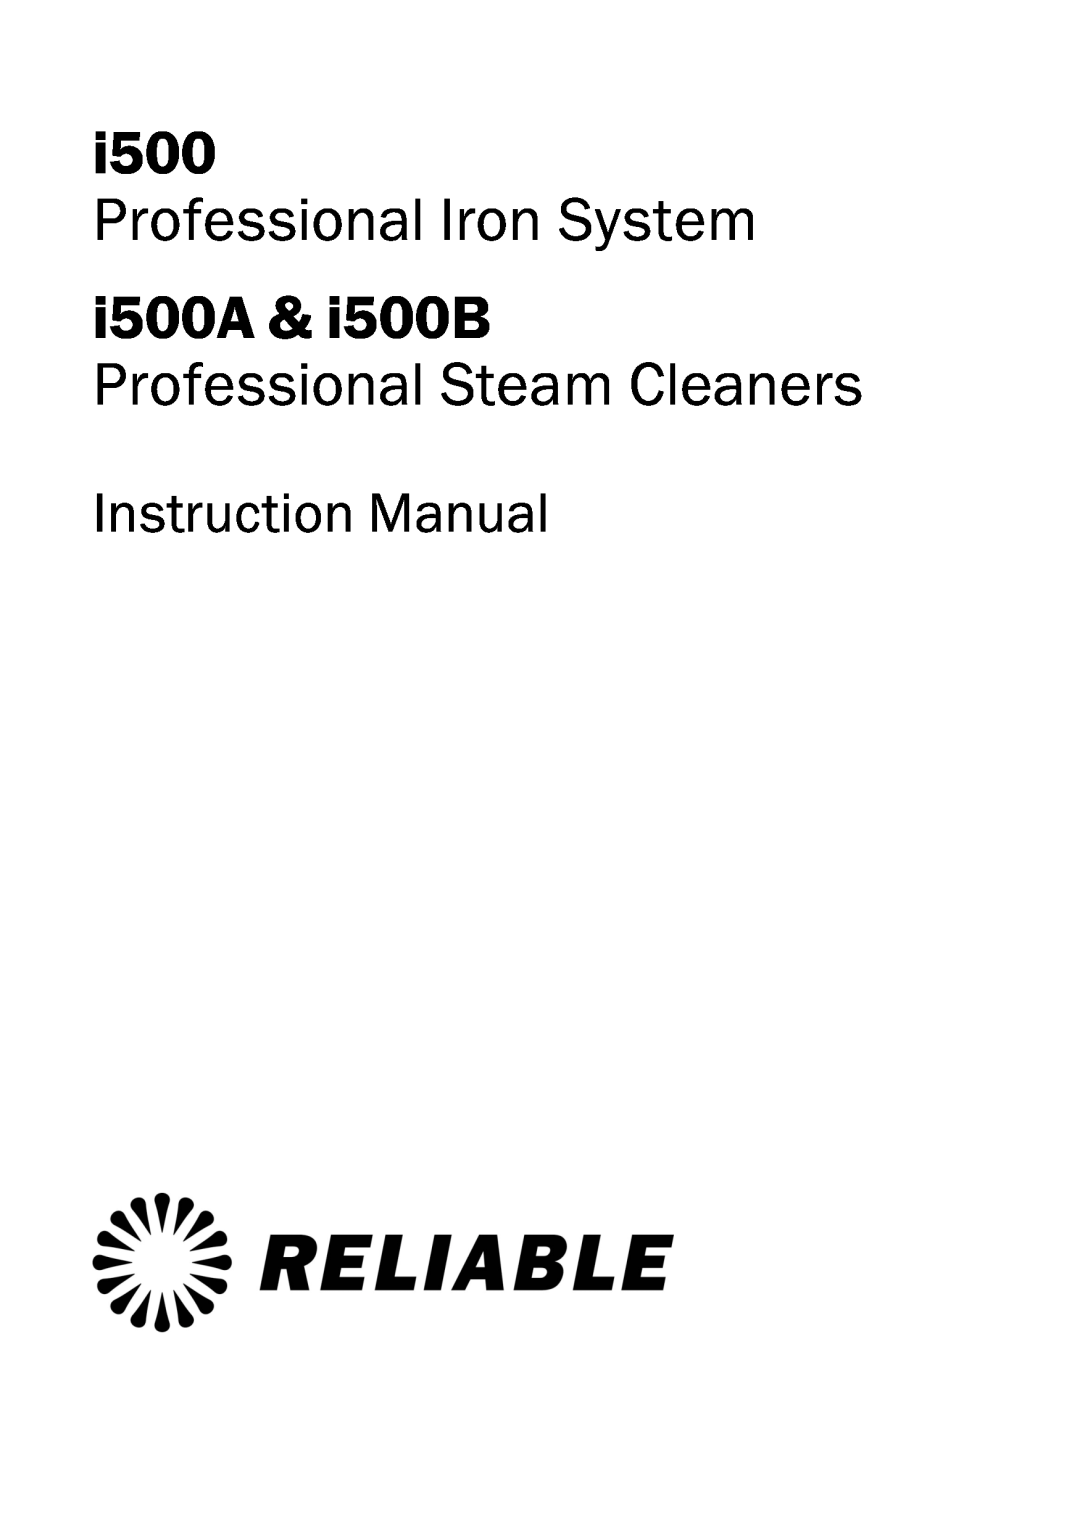 Reliable I500A instruction manual Professional Iron System, i500A & i500B, Professional Steam Cleaners 